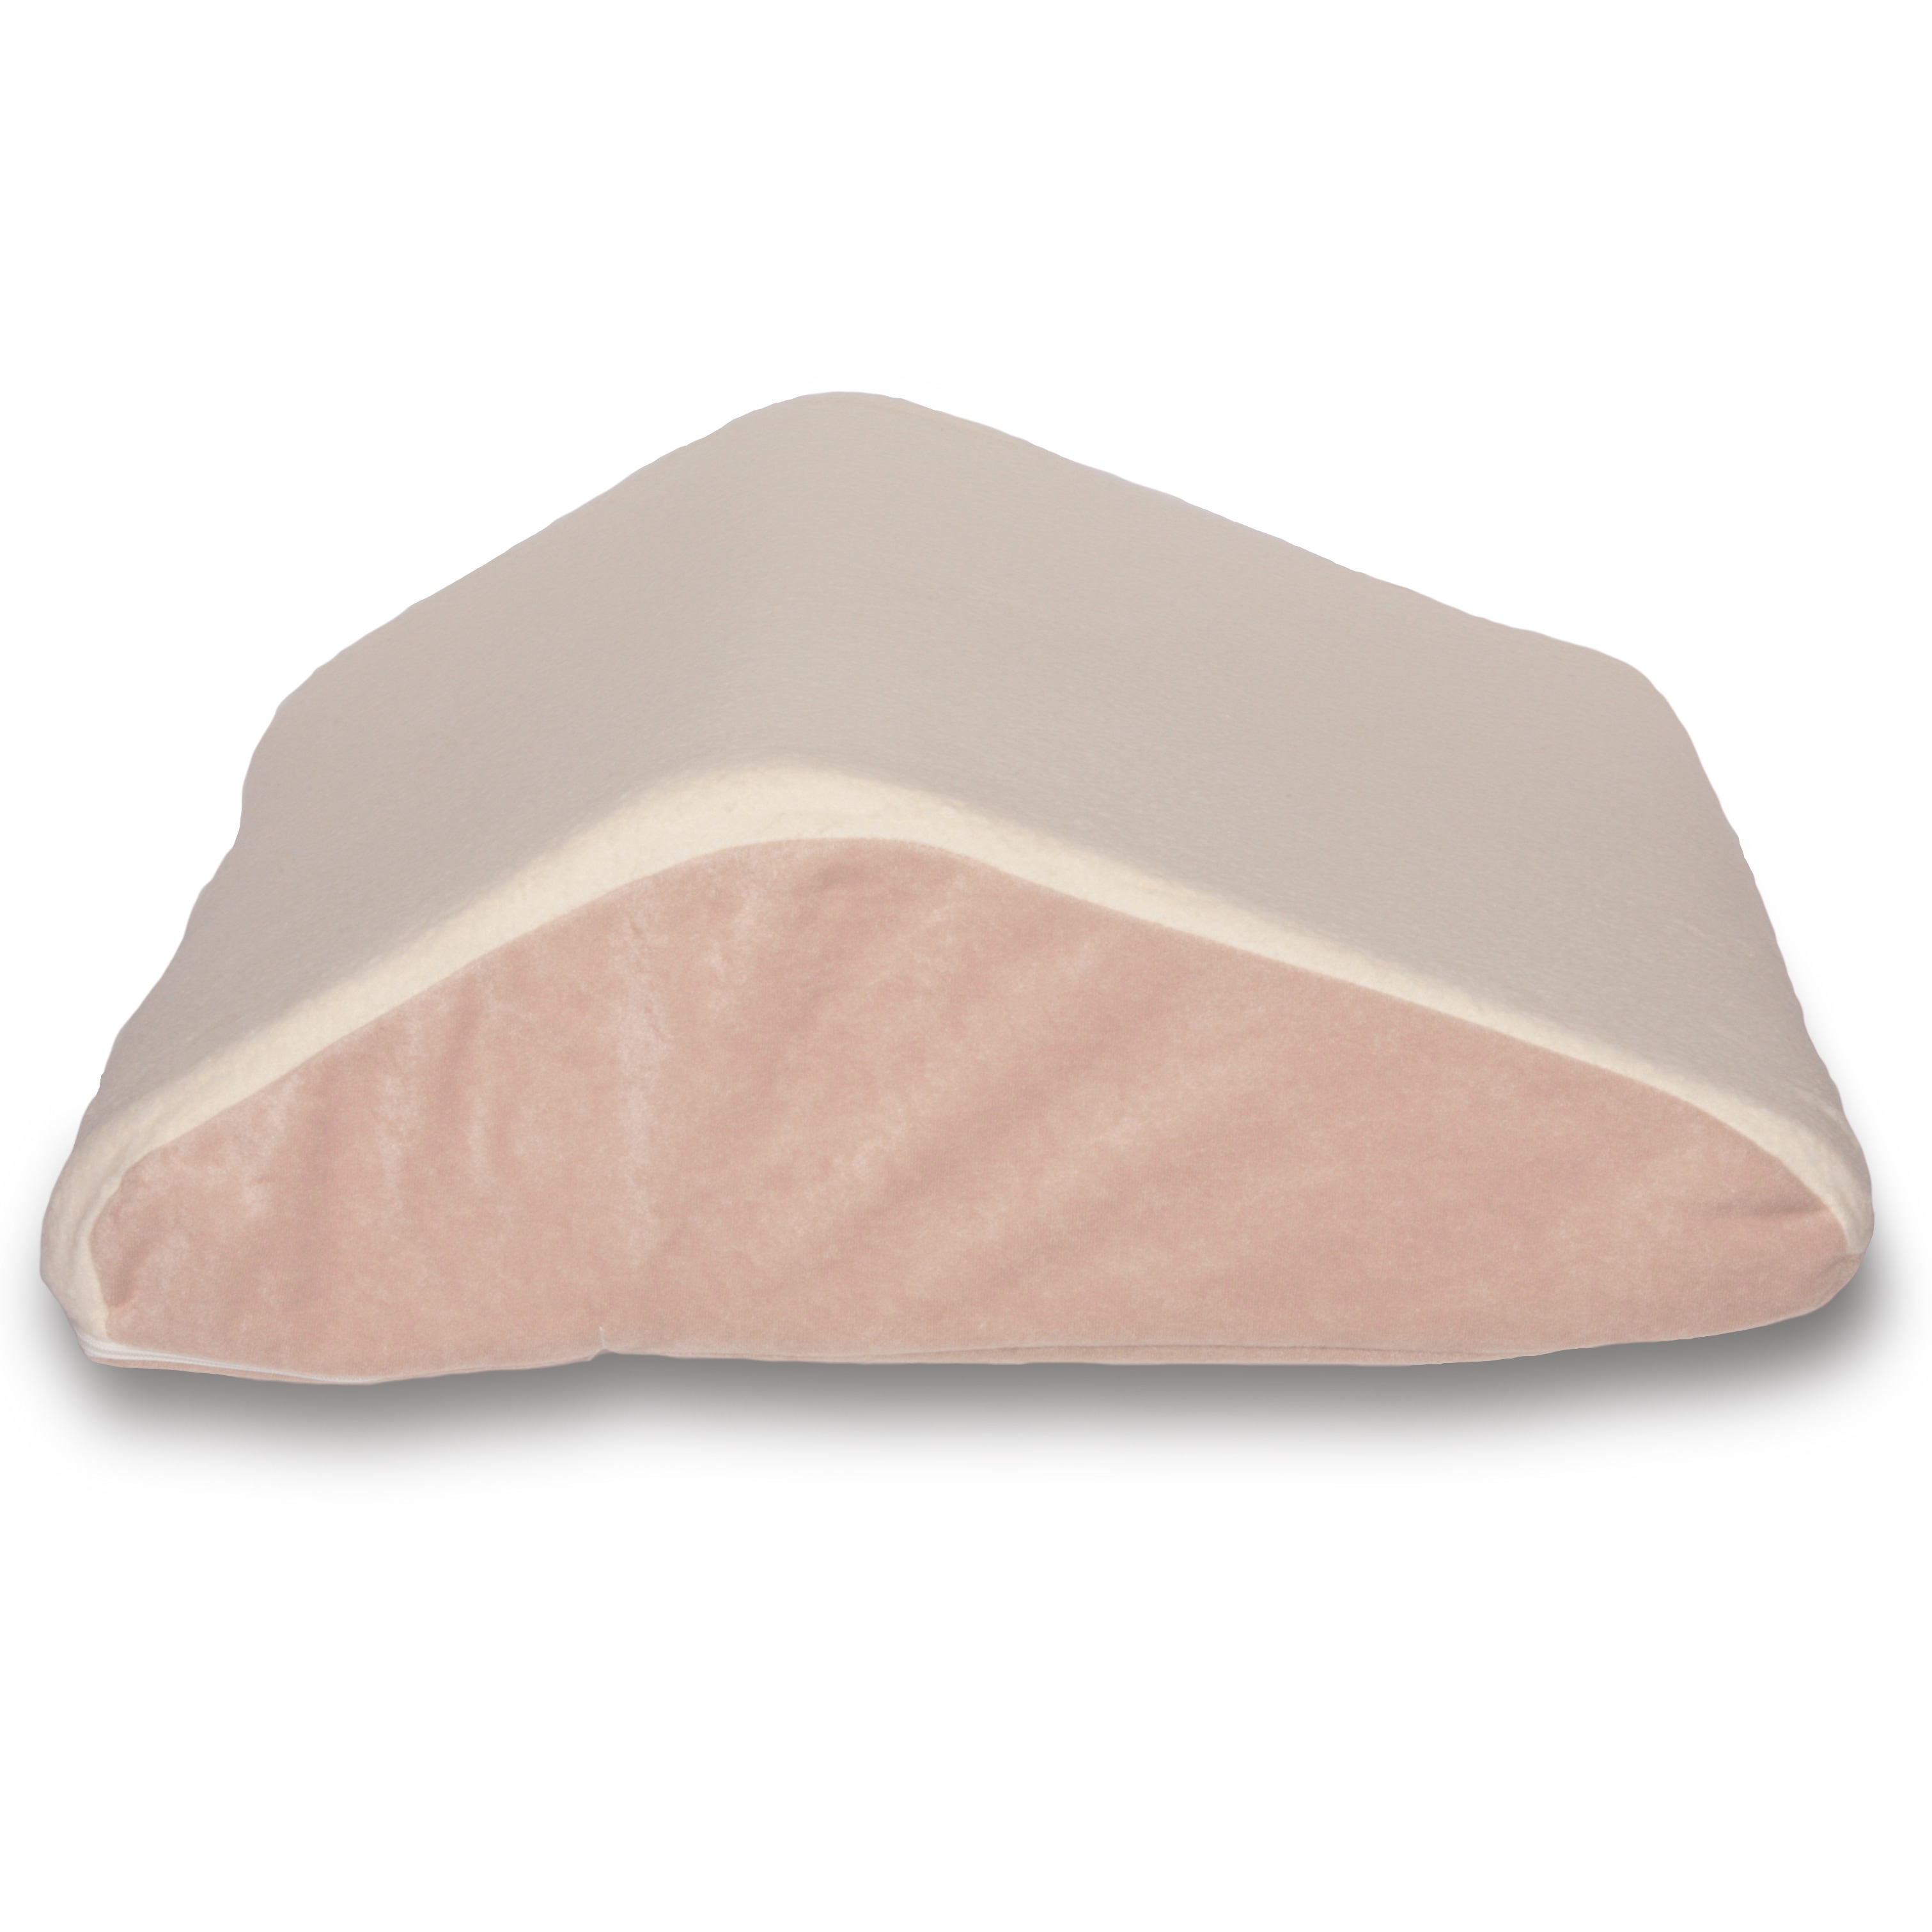 DeluxeComfort Leg Wedge Pillow - Best Memory Foam 2-in-1 Knee Pillows for  Sleeping and Support for Legs